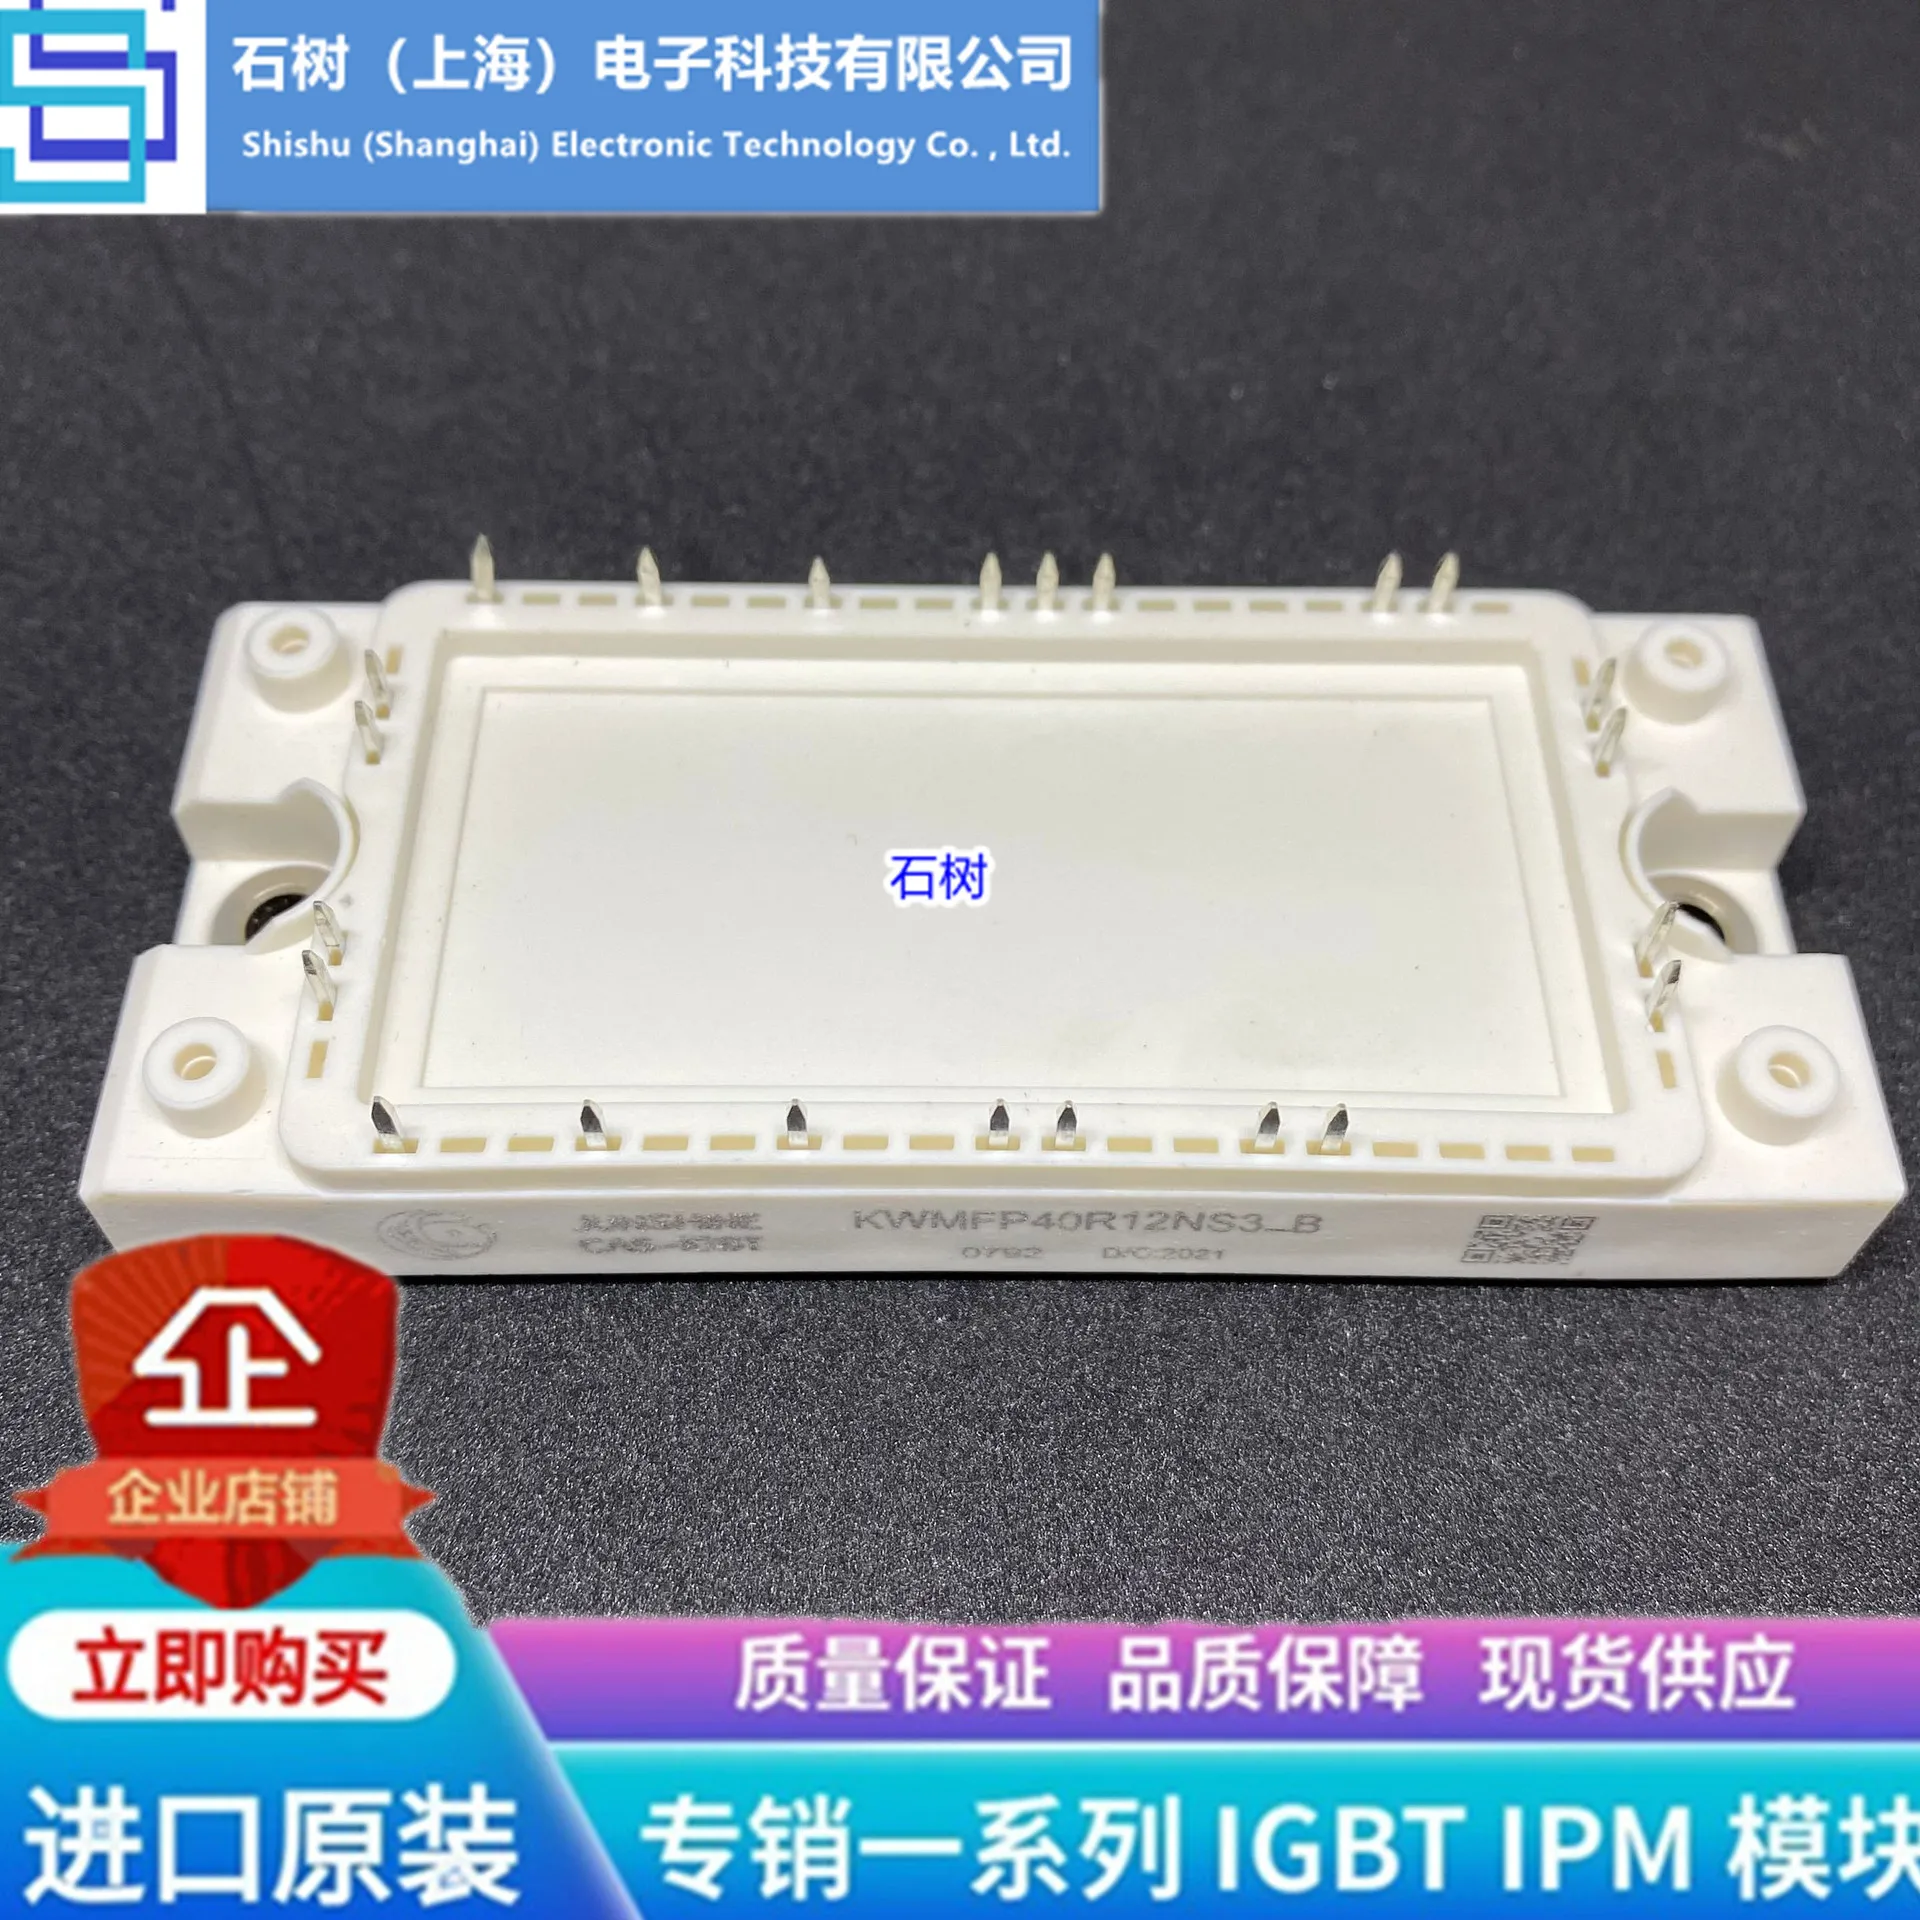 

Free delivery FP50R12KT4 35R12KT4 KWMFP25R12NS3-B KWMFP40R12N-S3 Module